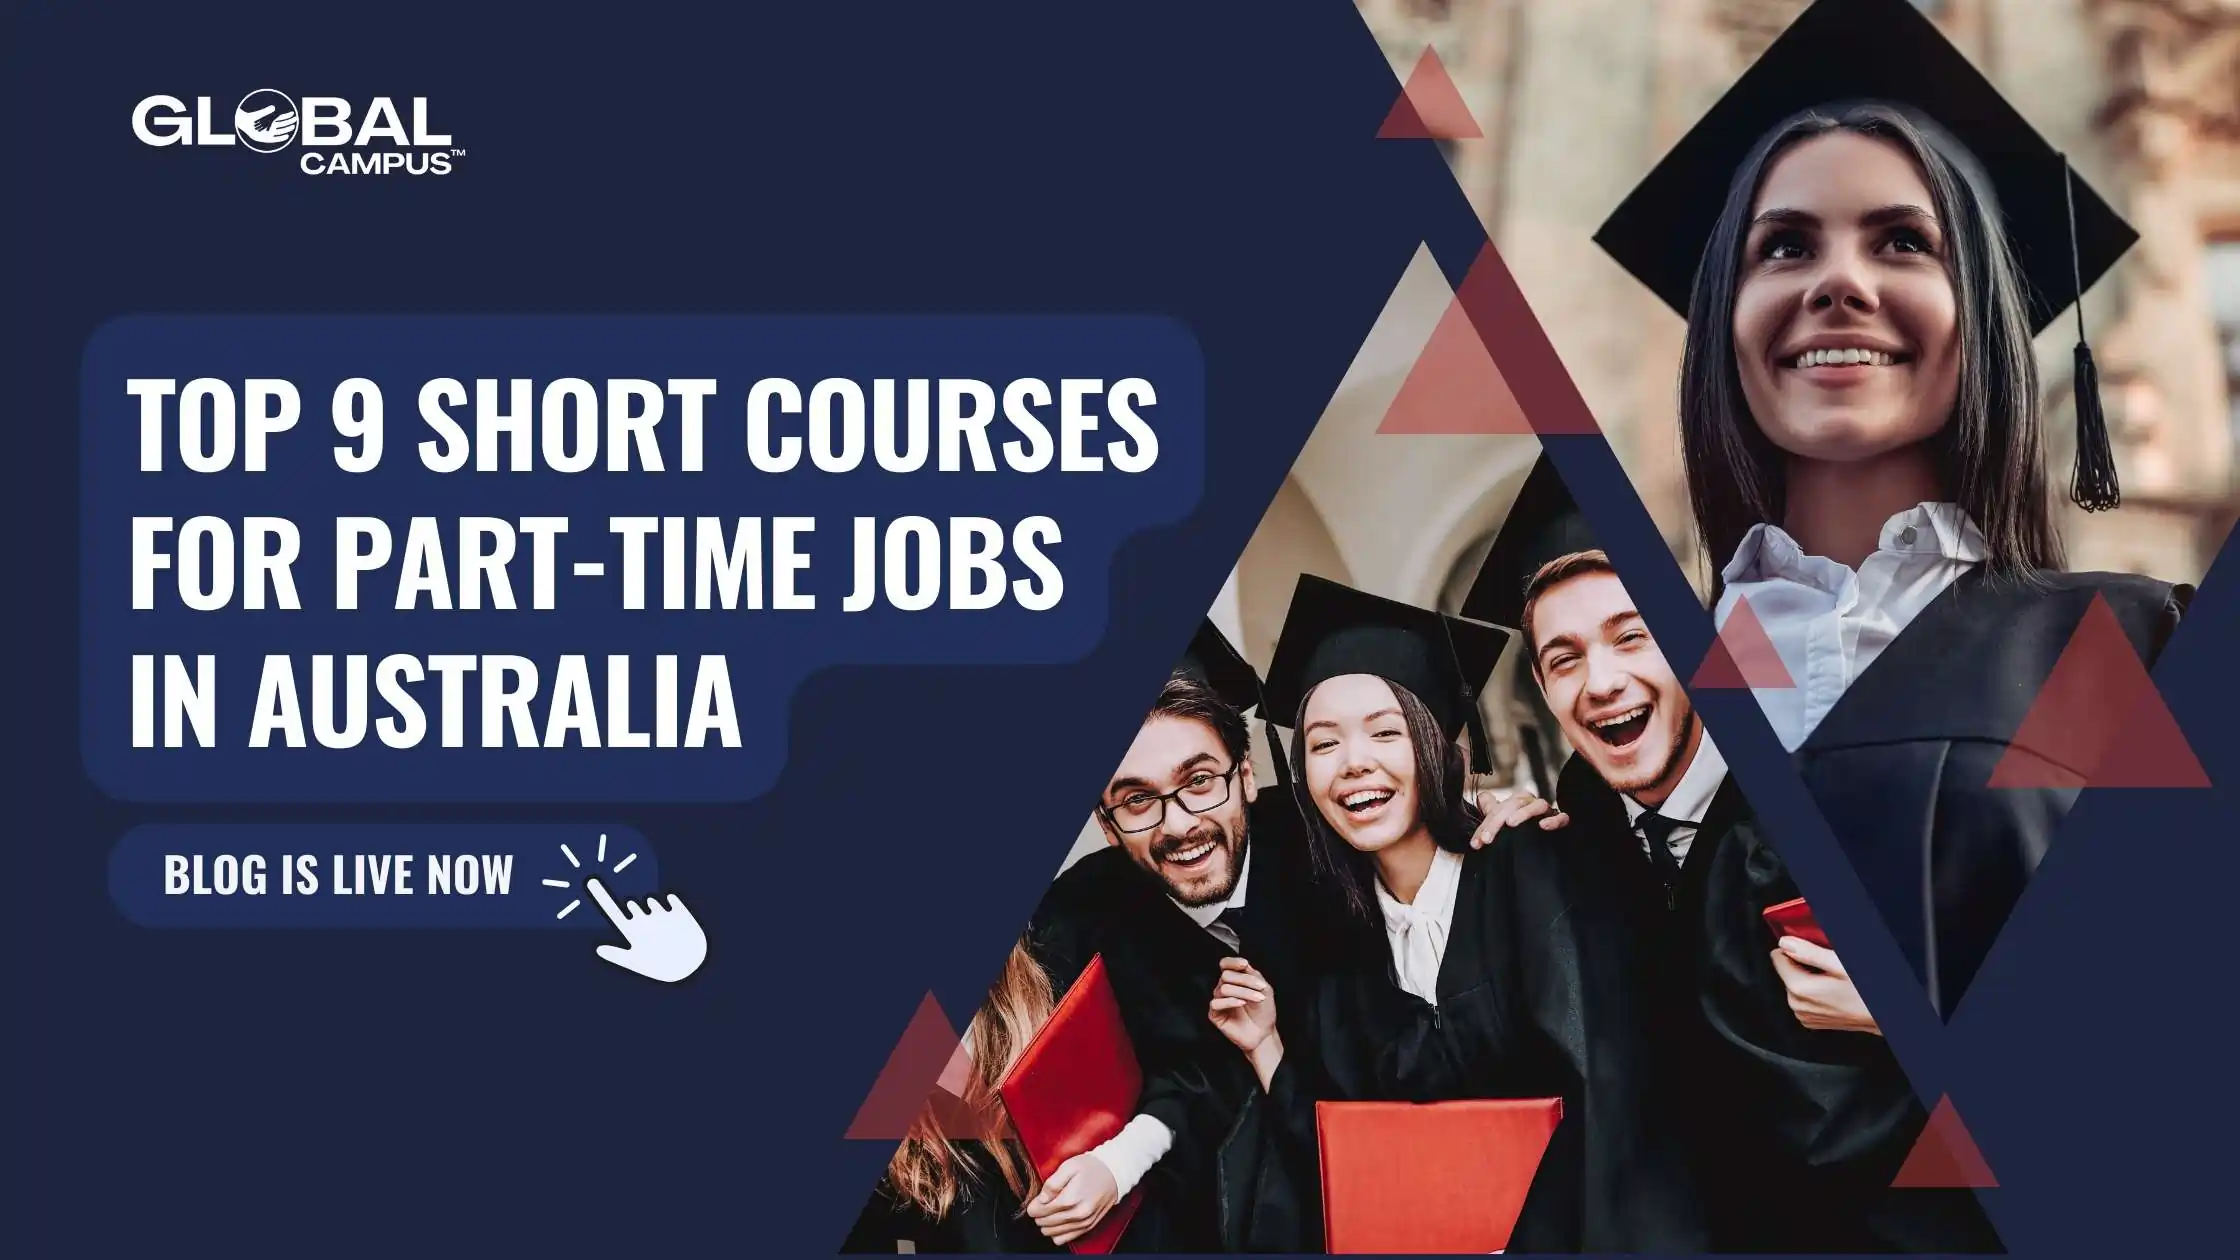 Happy graduates showing the importance of the top 9 short courses for part-time jobs in Australia.